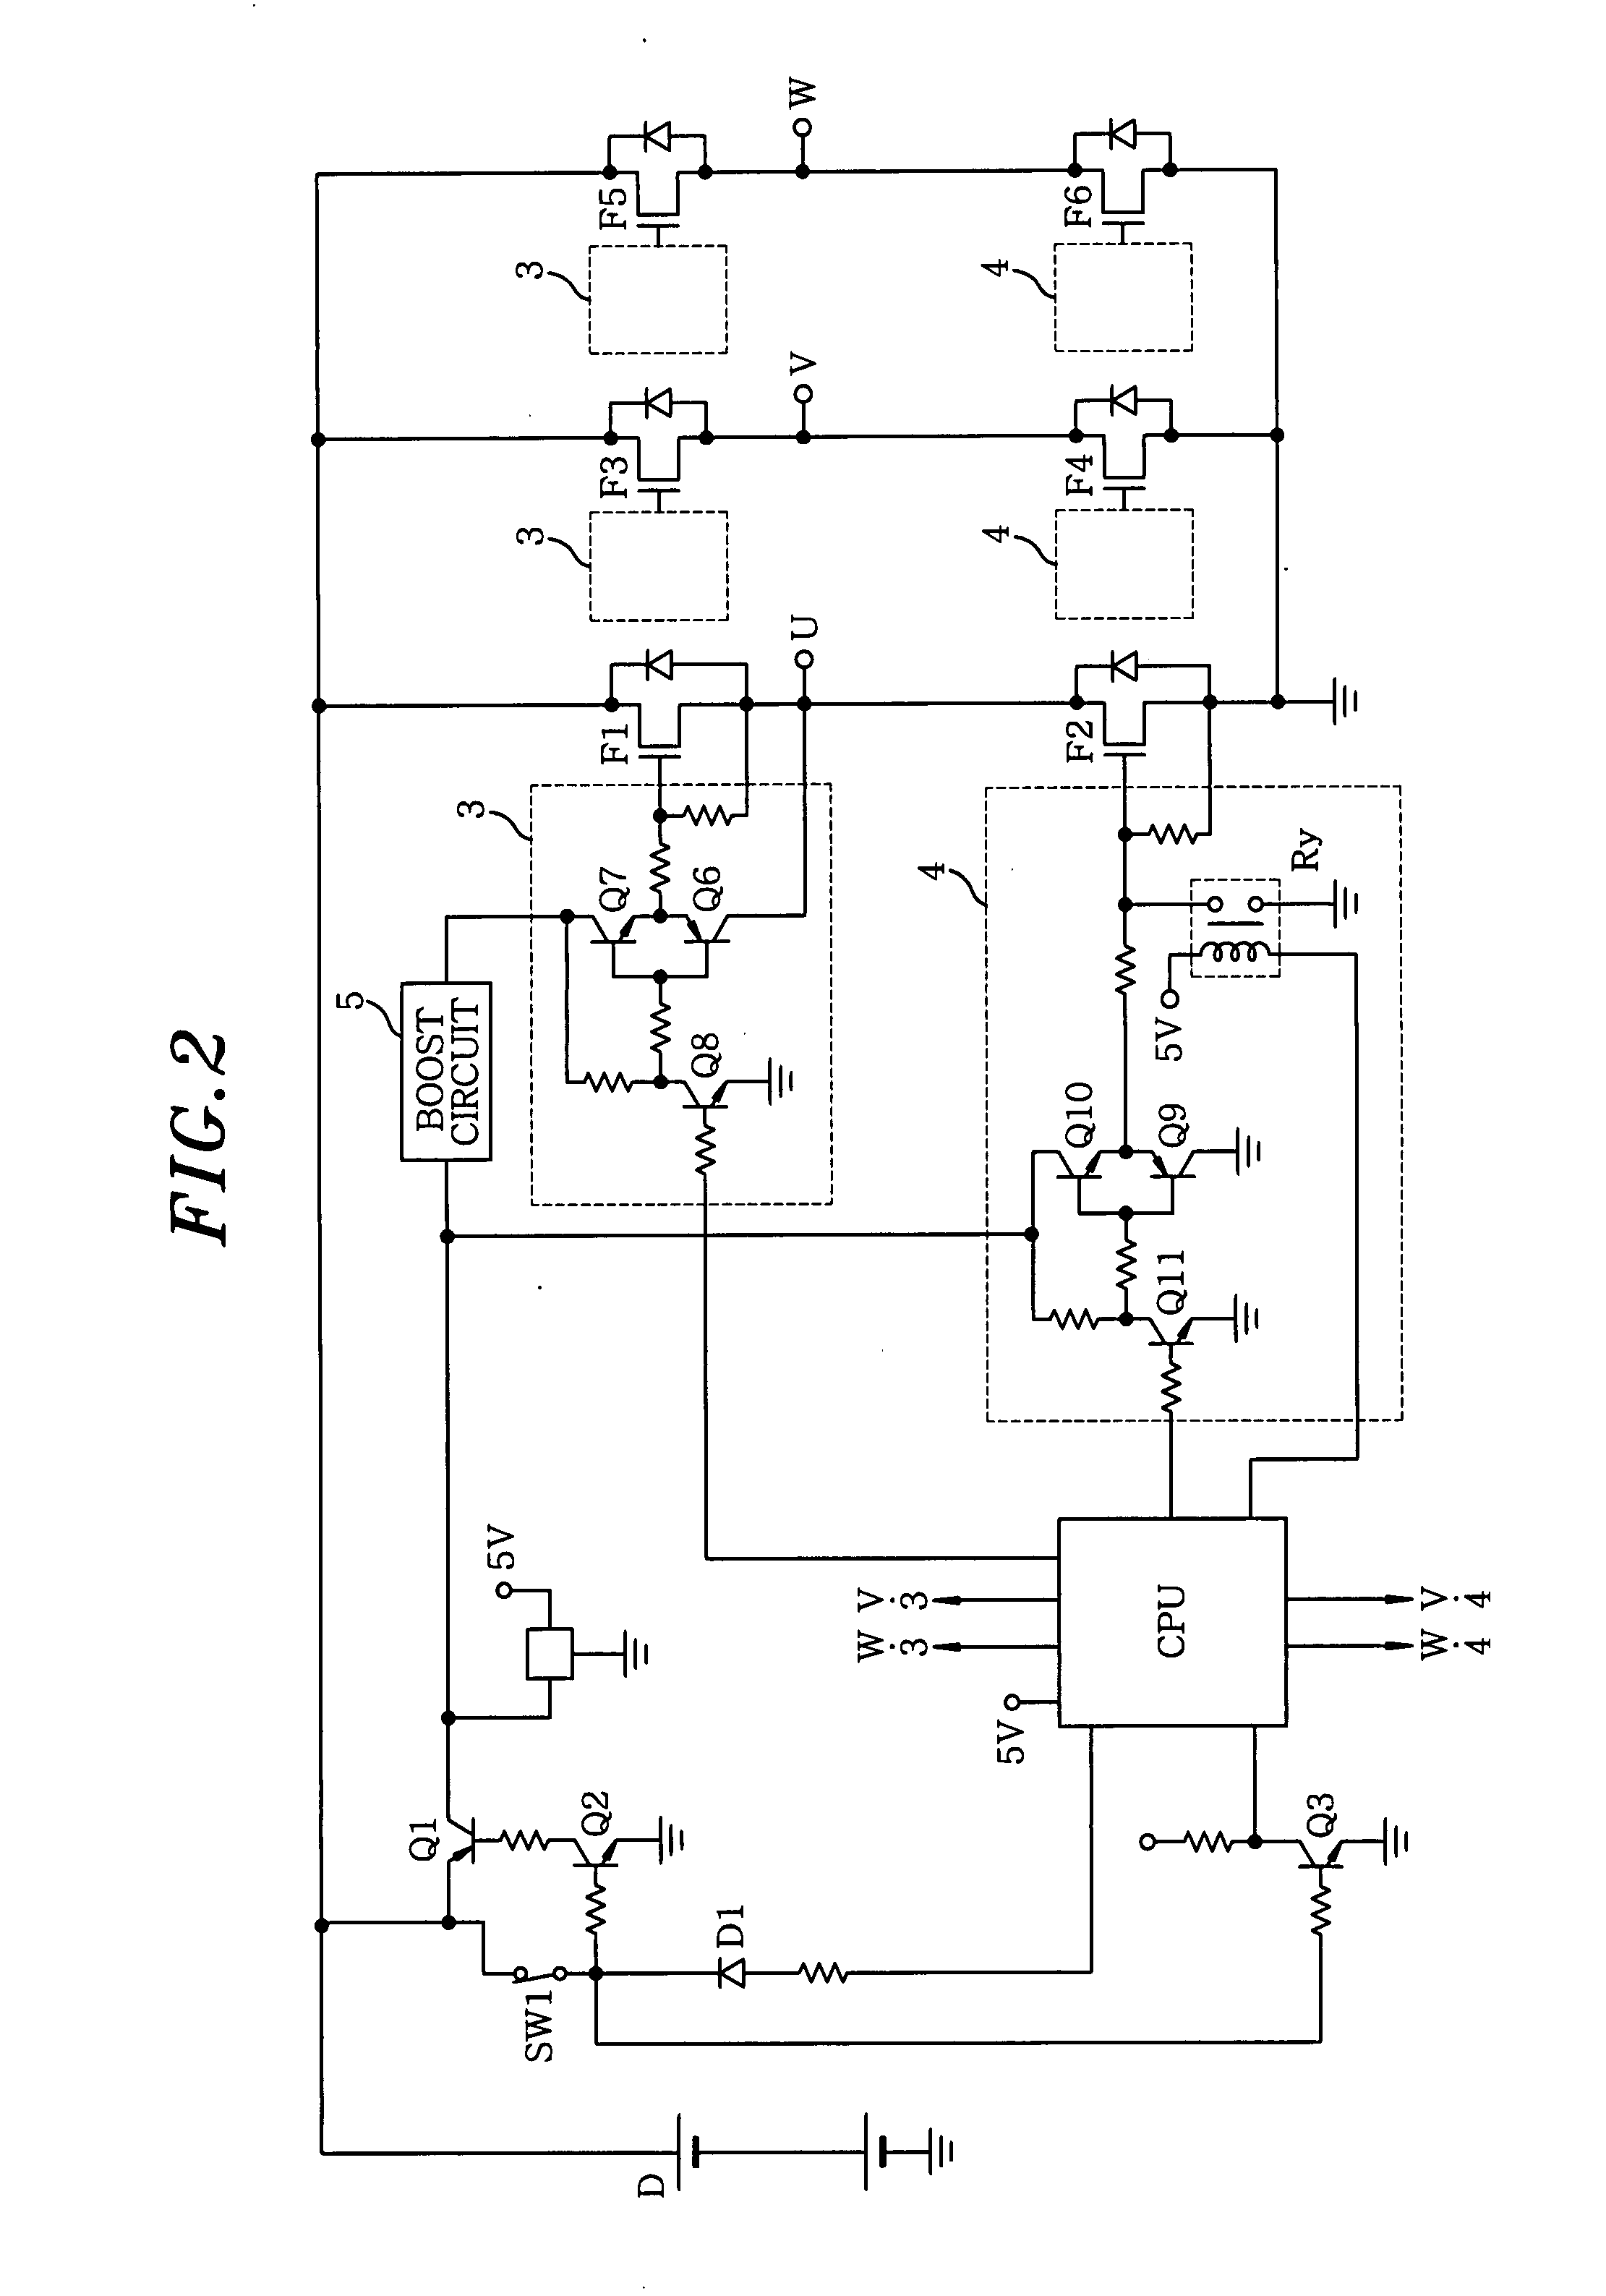 Control drive circuit for electric power tool